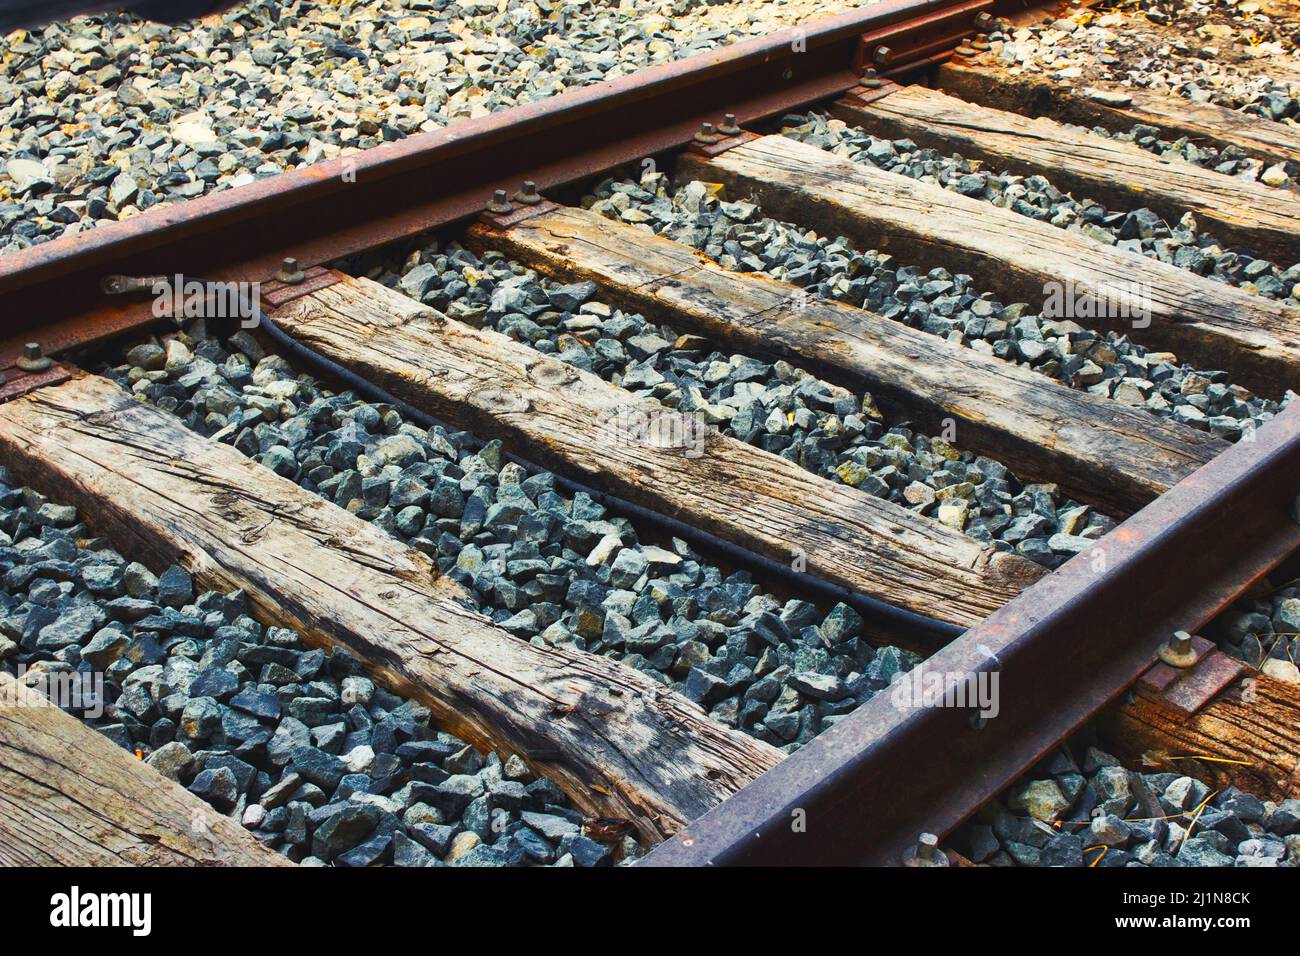 Close-up of train tracks, steel rails and wooden sleepers Stock Photo